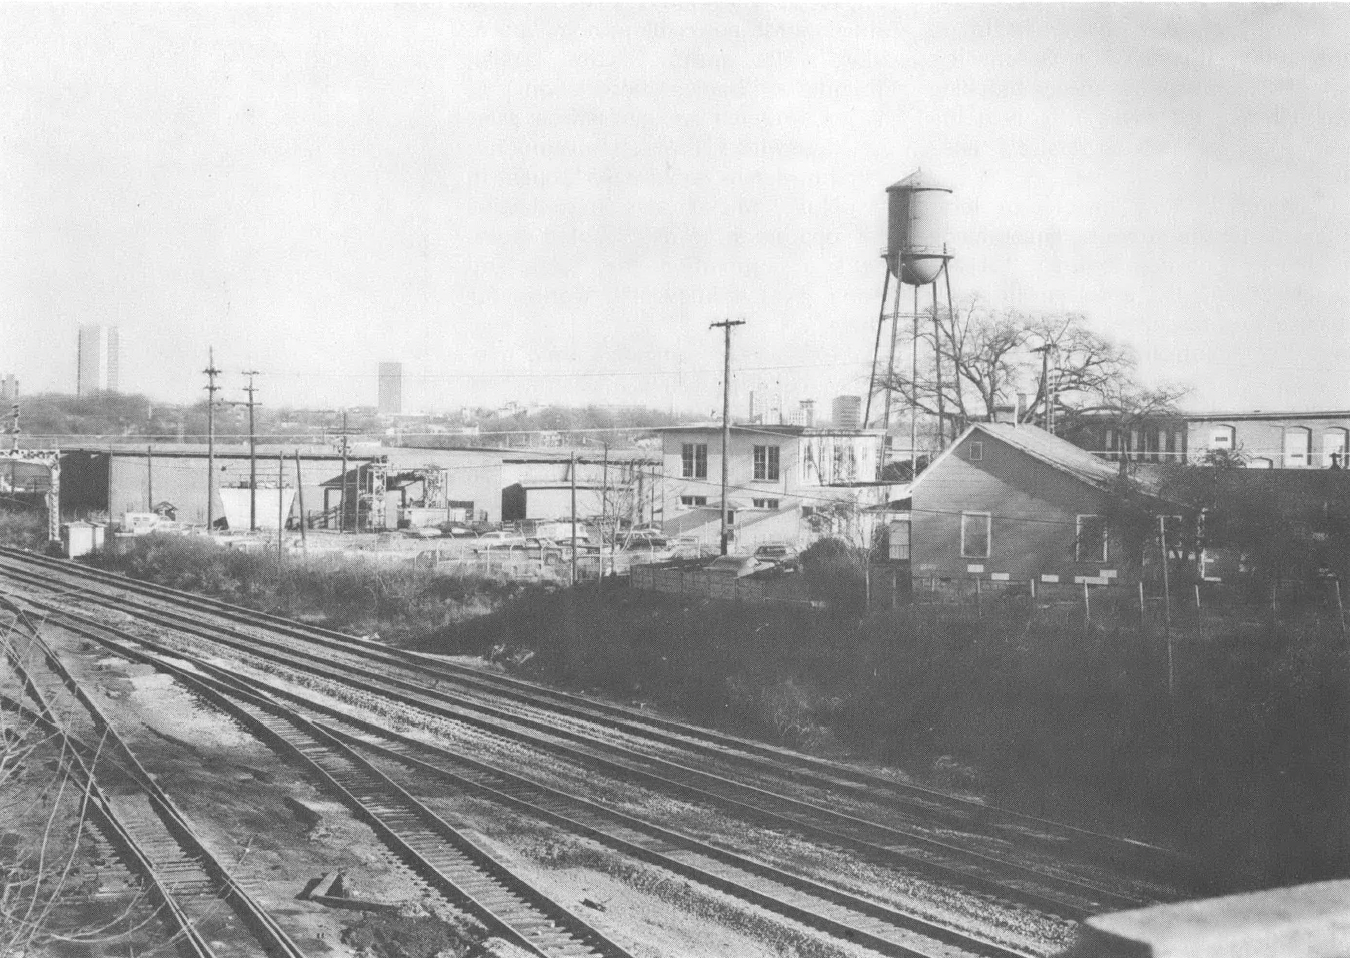 Black and white photo of railroad tracks and industrial landscape